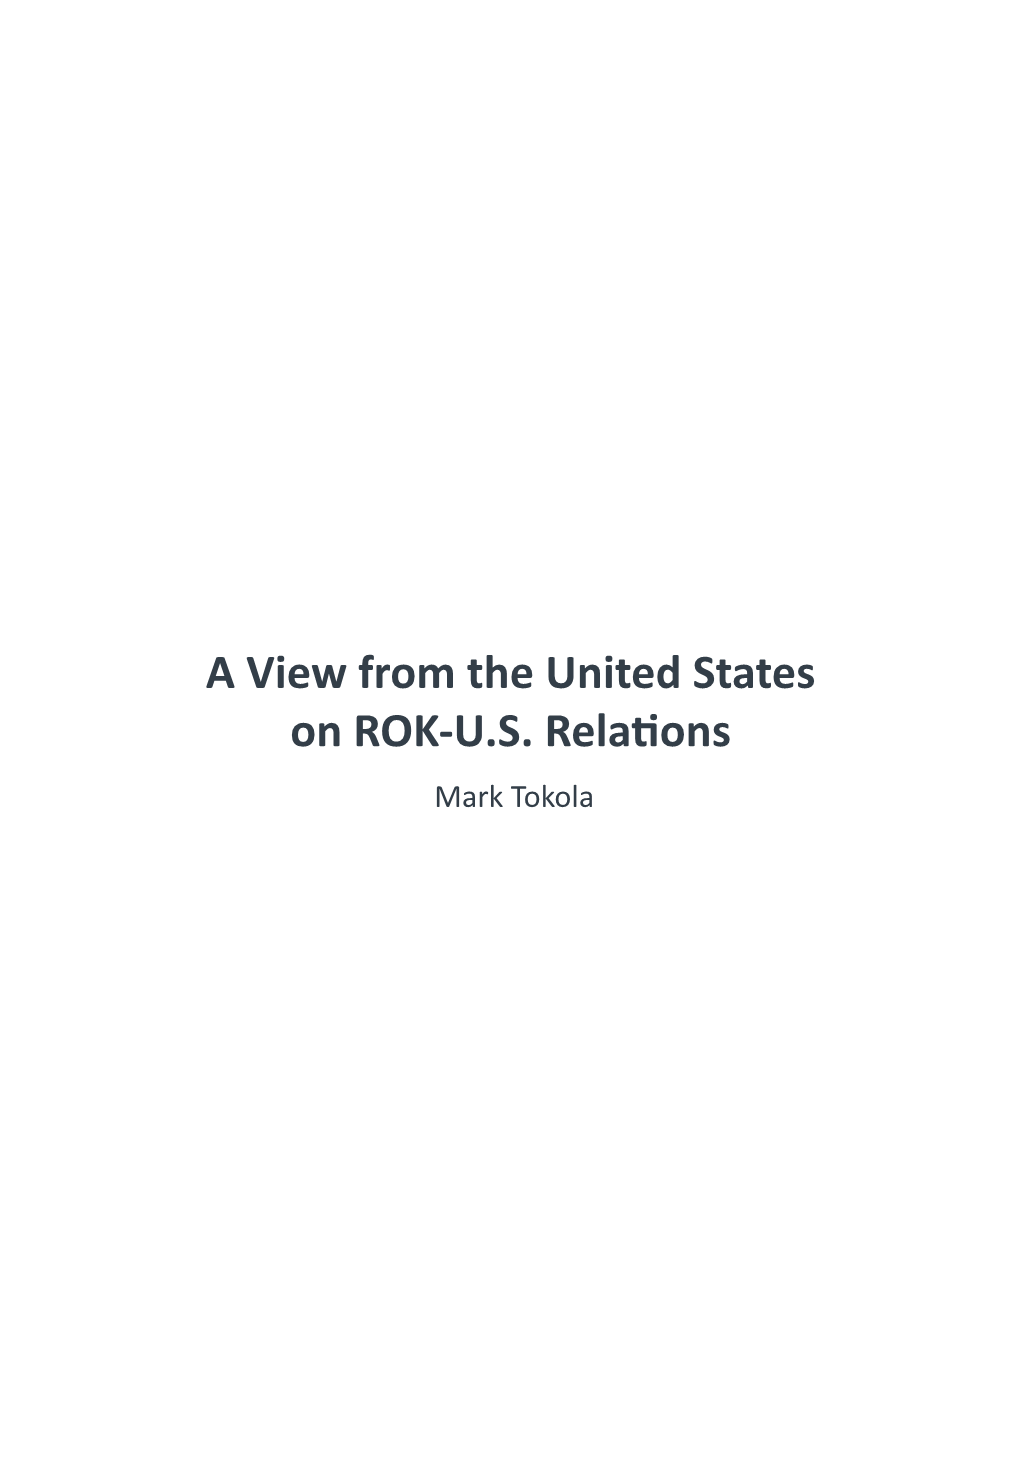 A View from the United States on ROK-US Relations